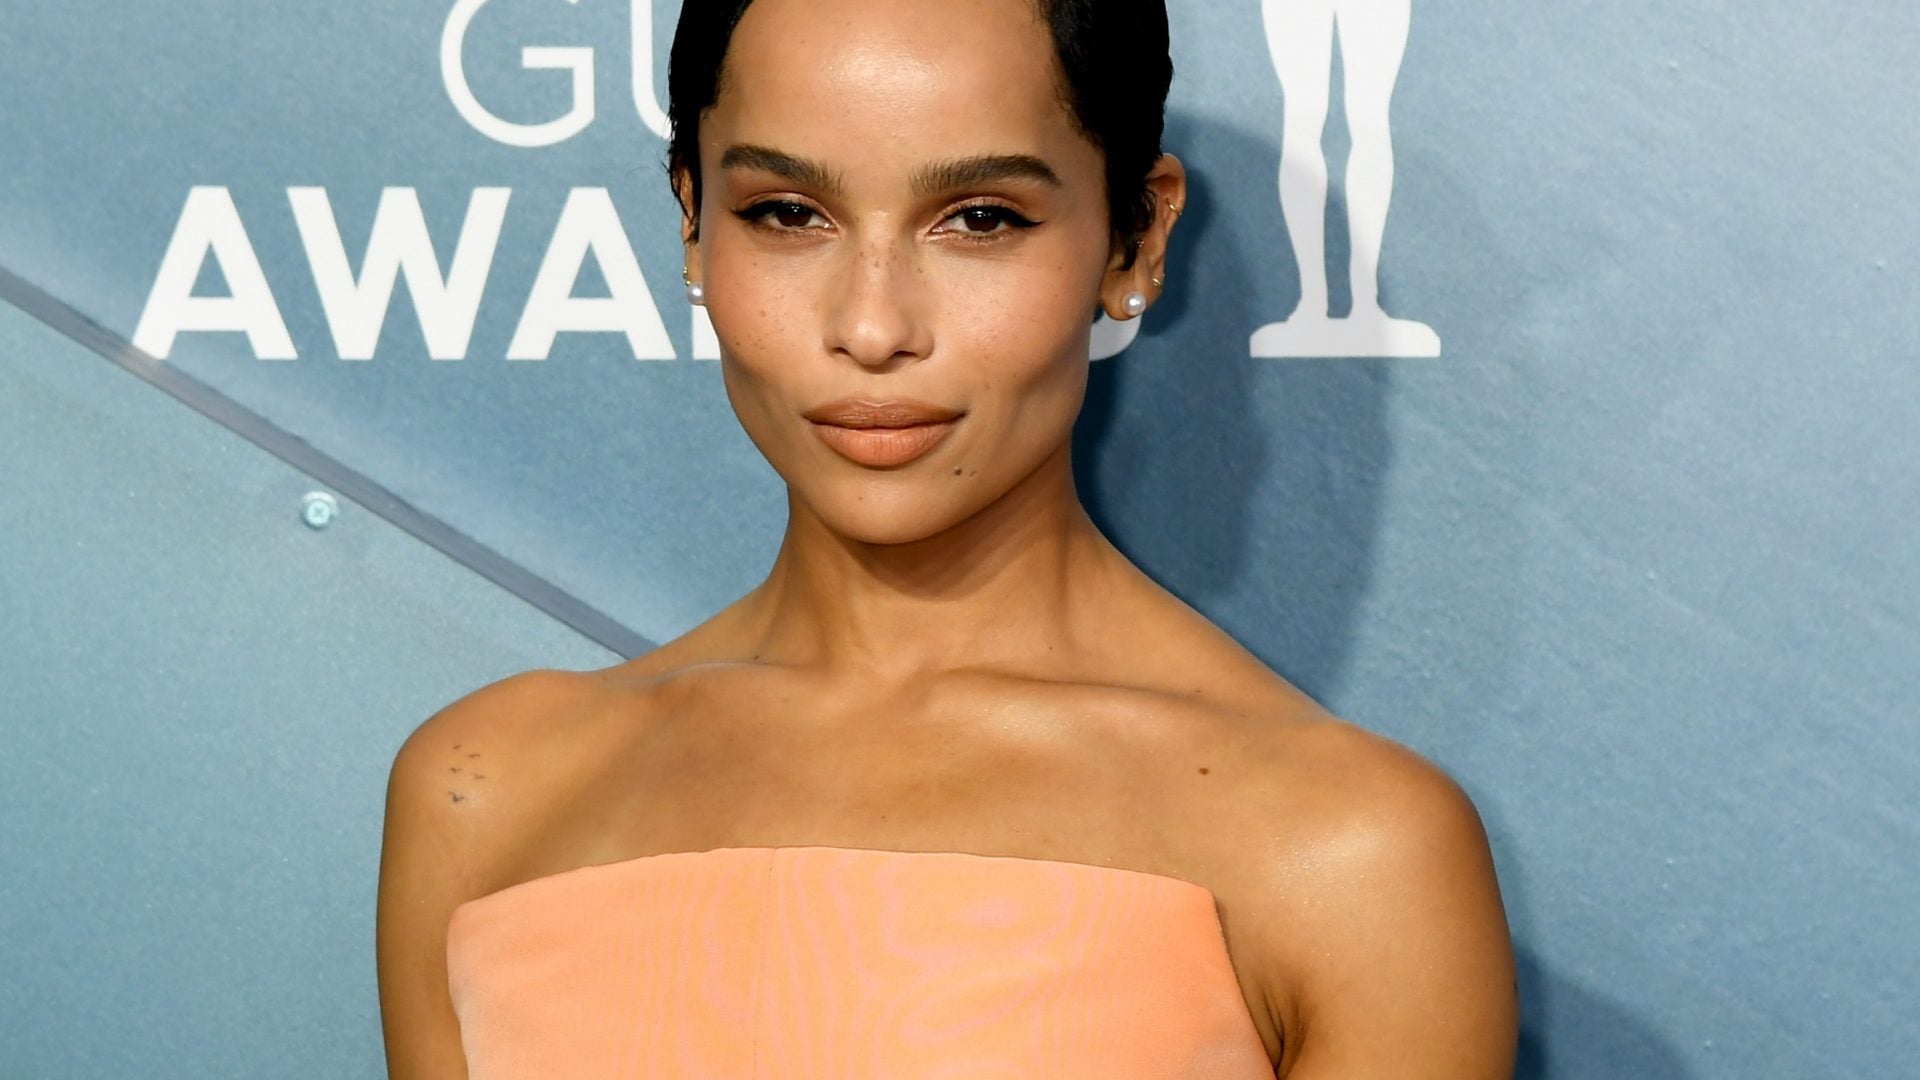 Zoe Kravitz Is The Gift That Keeps On Giving